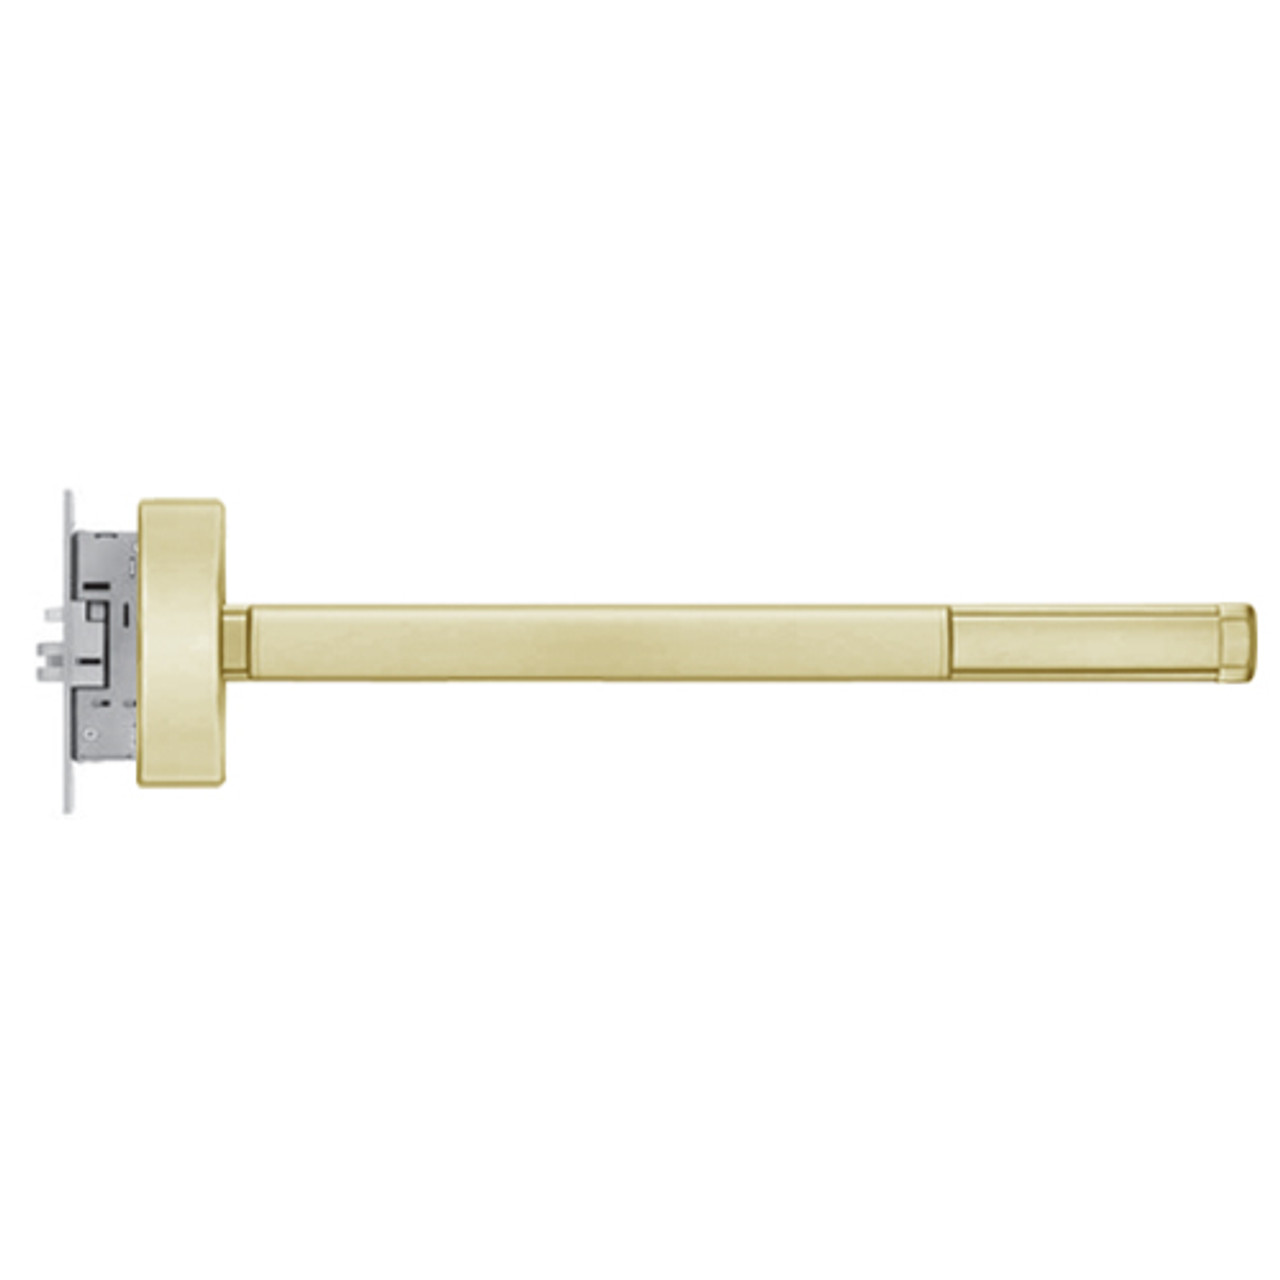 FL2305-RHR-606-36 PHI 2300 Series Fire Rated Apex Mortise Exit Device Prepped for Key Controls Thumb Piece in Satin Brass Finish